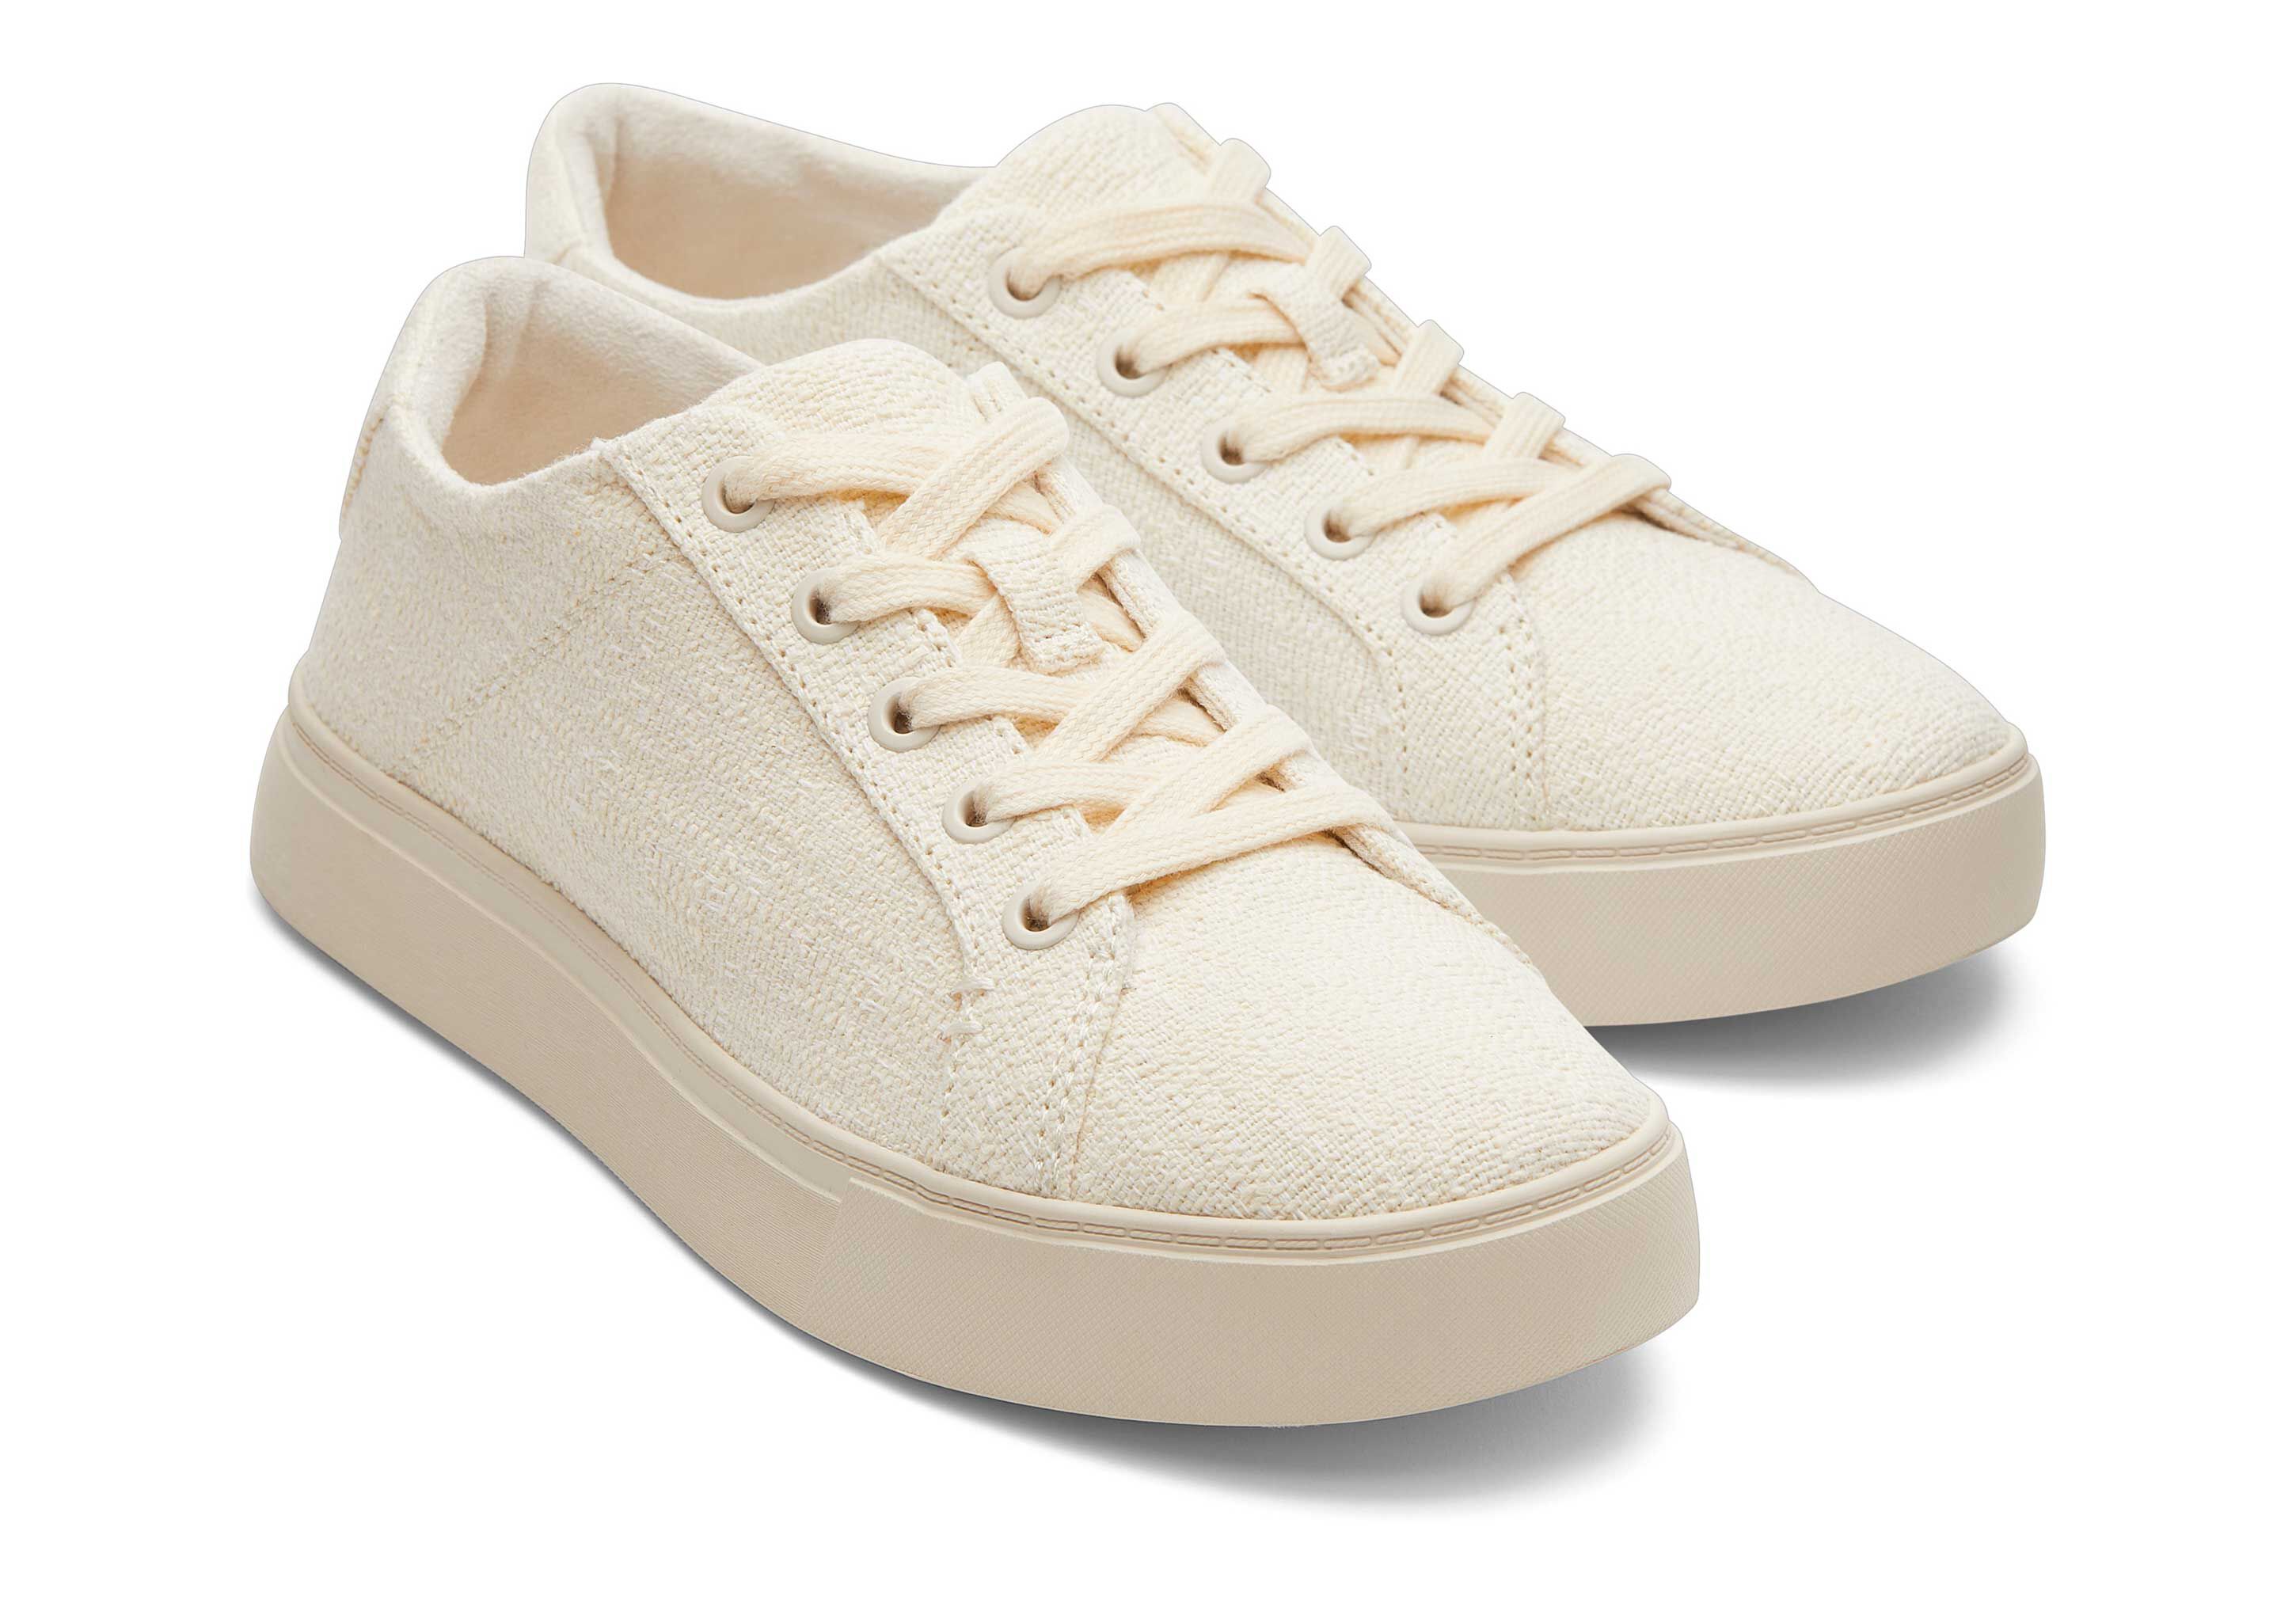 Soft-Brushed Faux-Suede Sneakers For Women | Old Navy | Brown sneakers women,  Brown sneakers, Faux suede